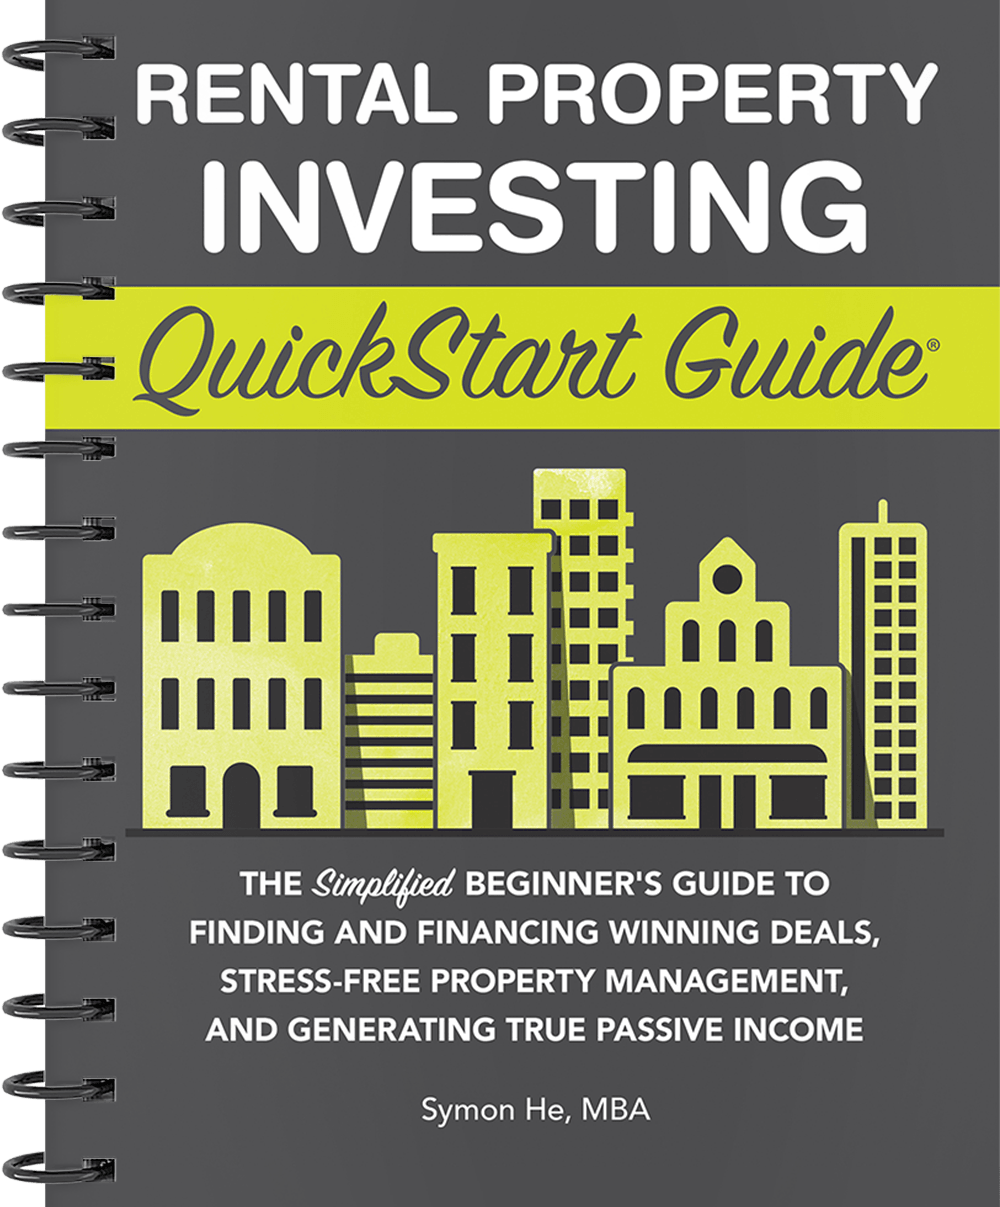 Rental Property Investing QuickStart Guide by Symon He MBA ISBN 978-1-63610-025-8 in spiral-bound format. #format_spiral-bound